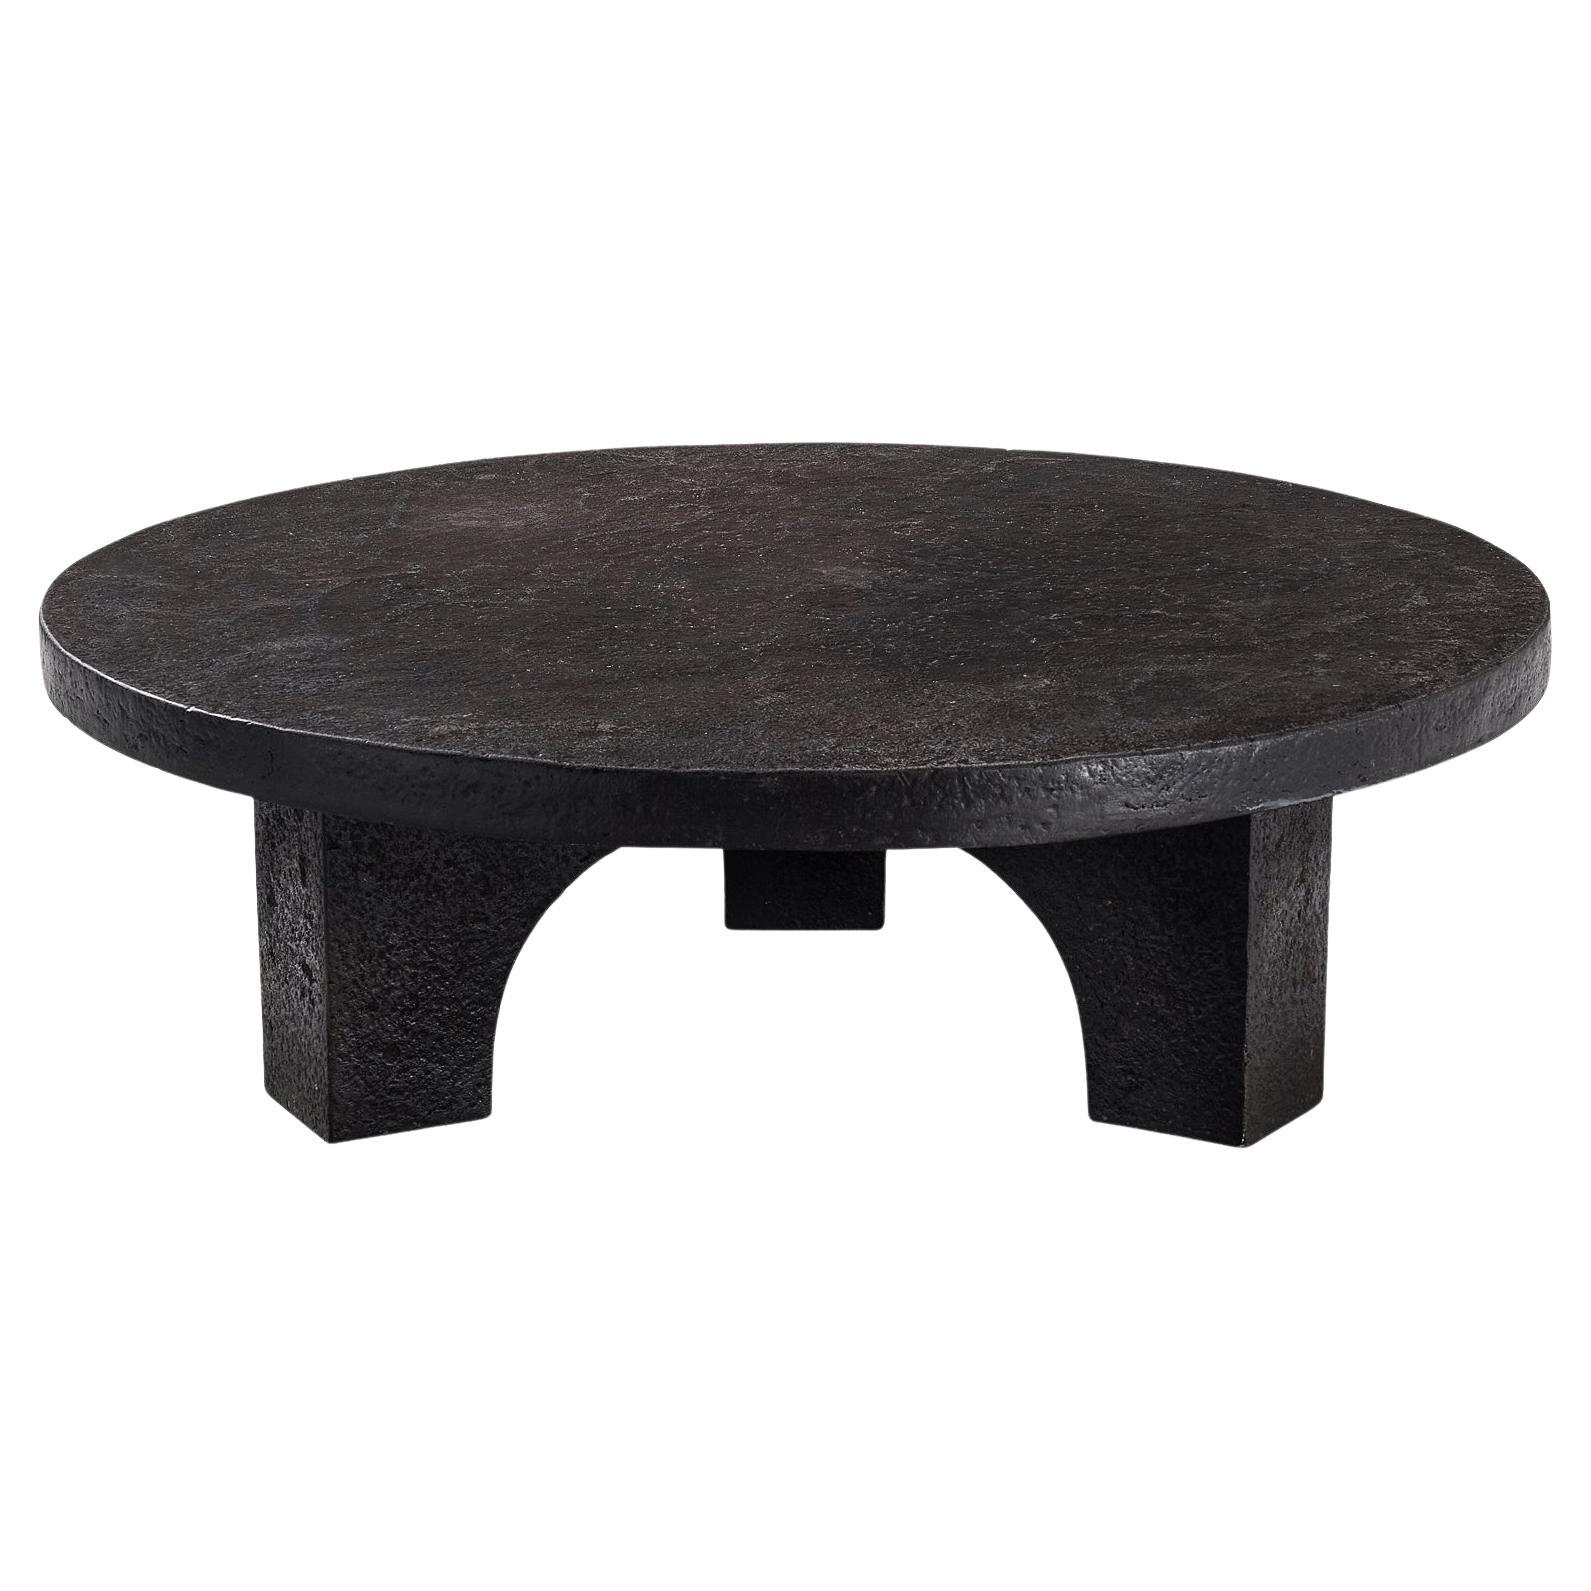 Round Brutalist Coffee Table with Stone Look 